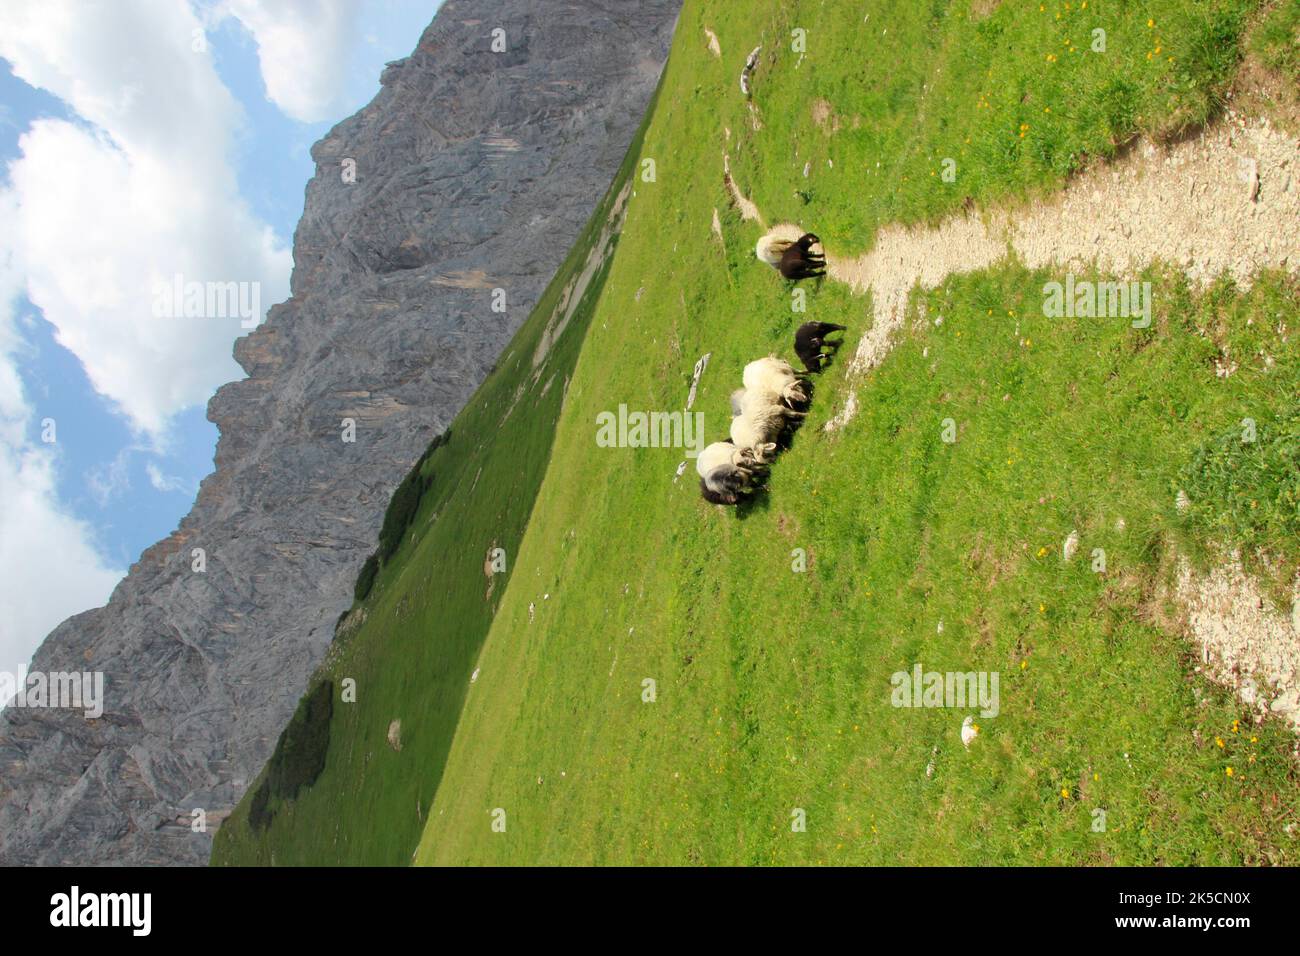 Summer, summer atmosphere in the Puittal in the Wetterstein mountains, Tyrol, mountain sheep, sheep on the hiking trail Stock Photo